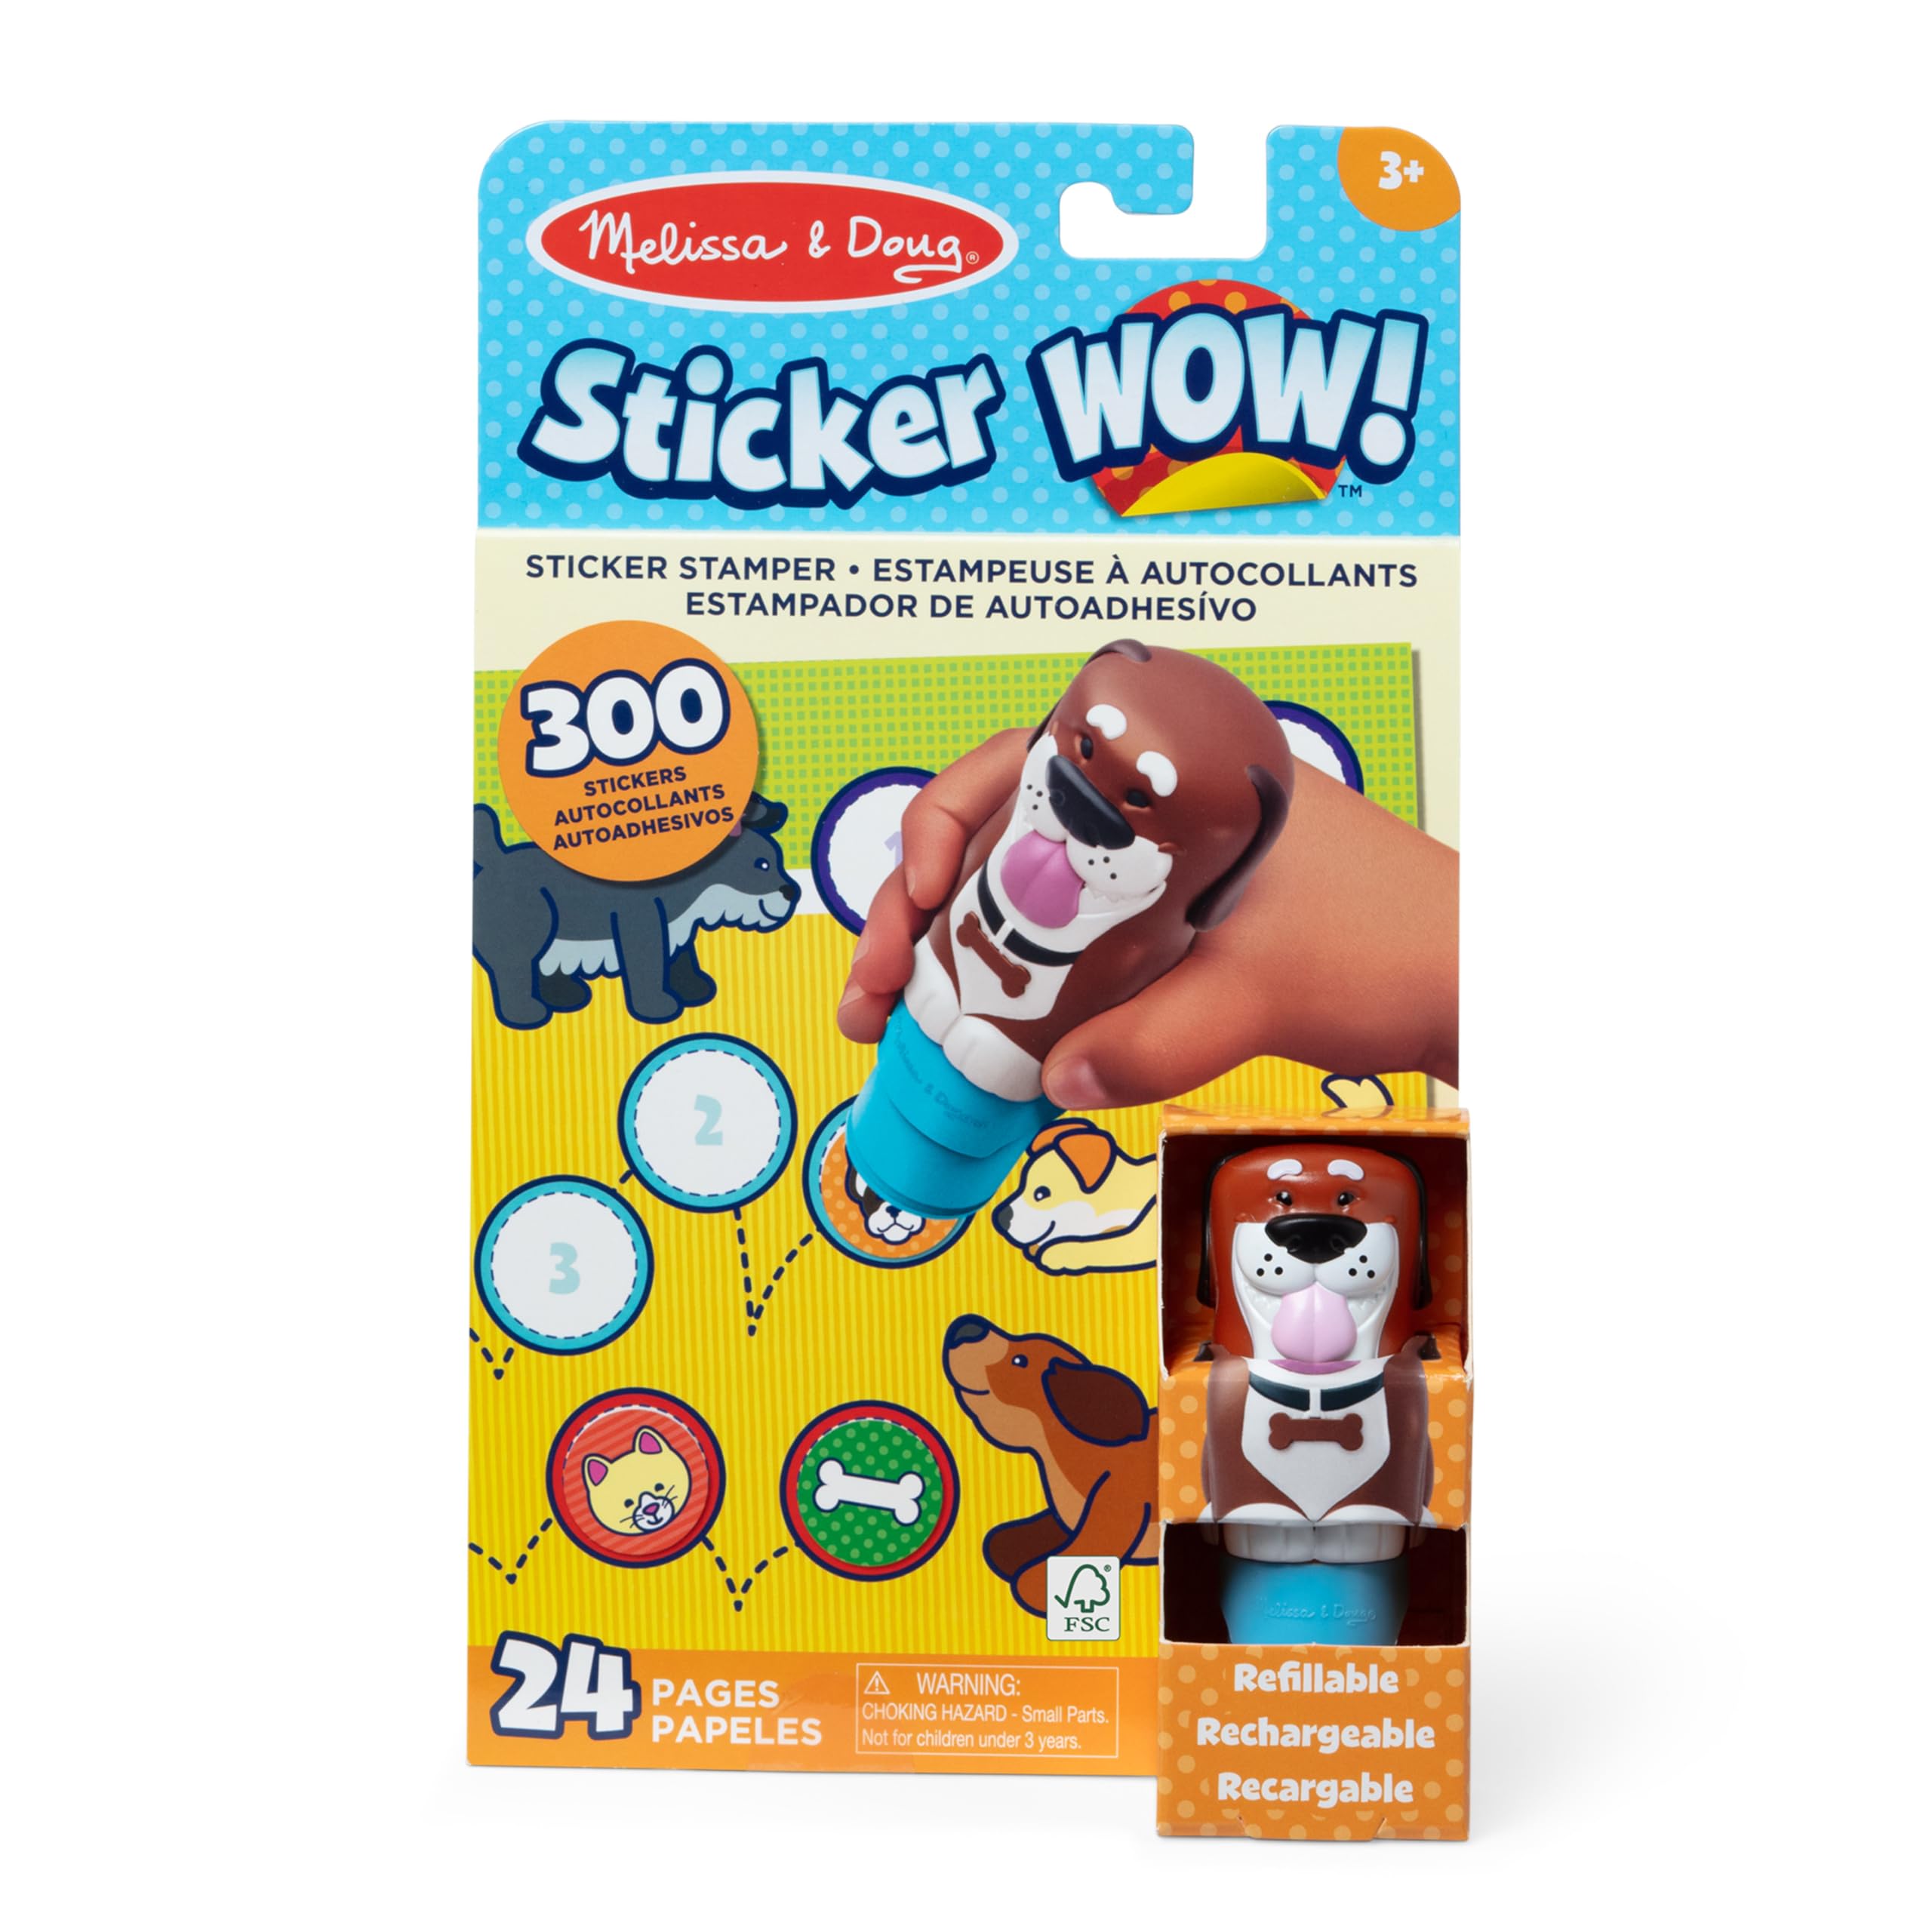 Melissa & Doug Sticker Wow!™ 24-Page Activity Pad and Sticker Stamper, 300 Stickers, Arts and Crafts Fidget Toy Collectible Character – Dog Creative Play for Girls and Boys 3+